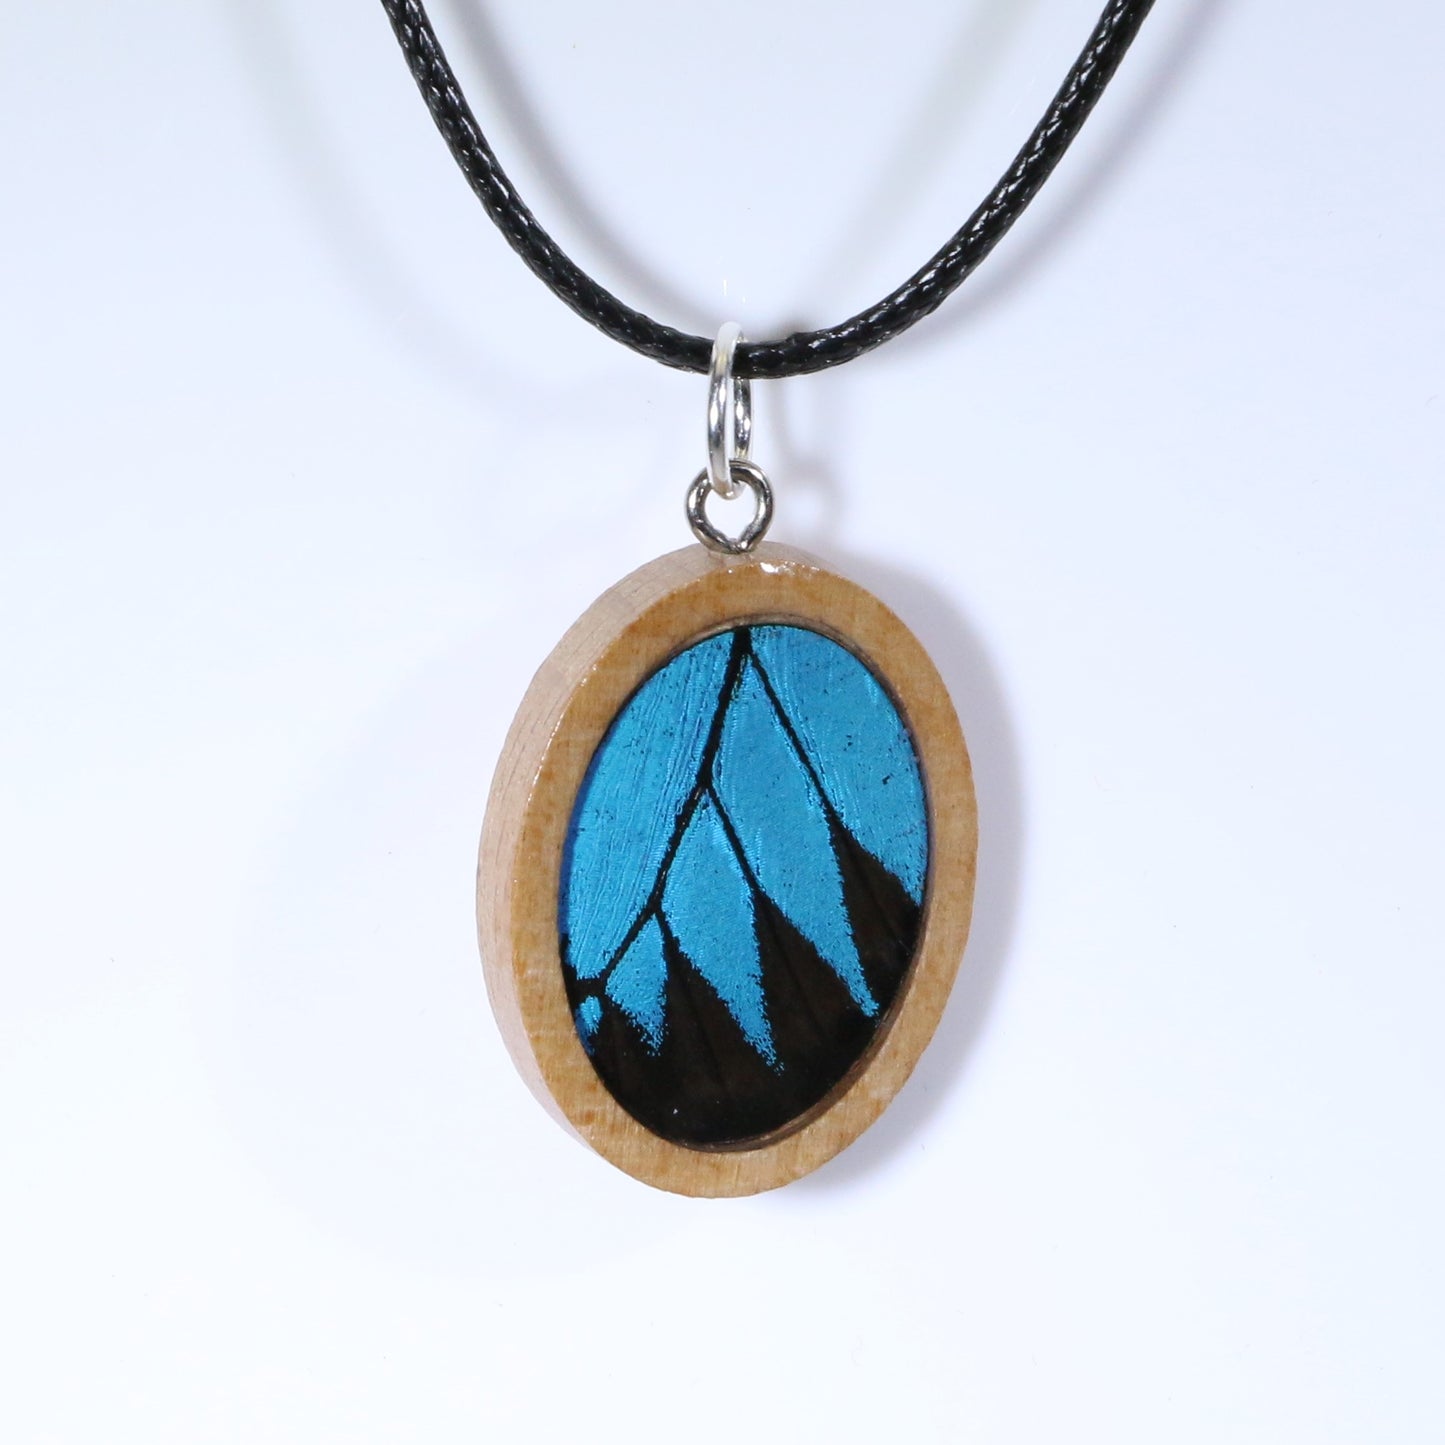 52607 - Real Butterfly Wing Jewelry - Pendant - Tan Wood - Oval - Plain - Blue Mountain Swallowtail